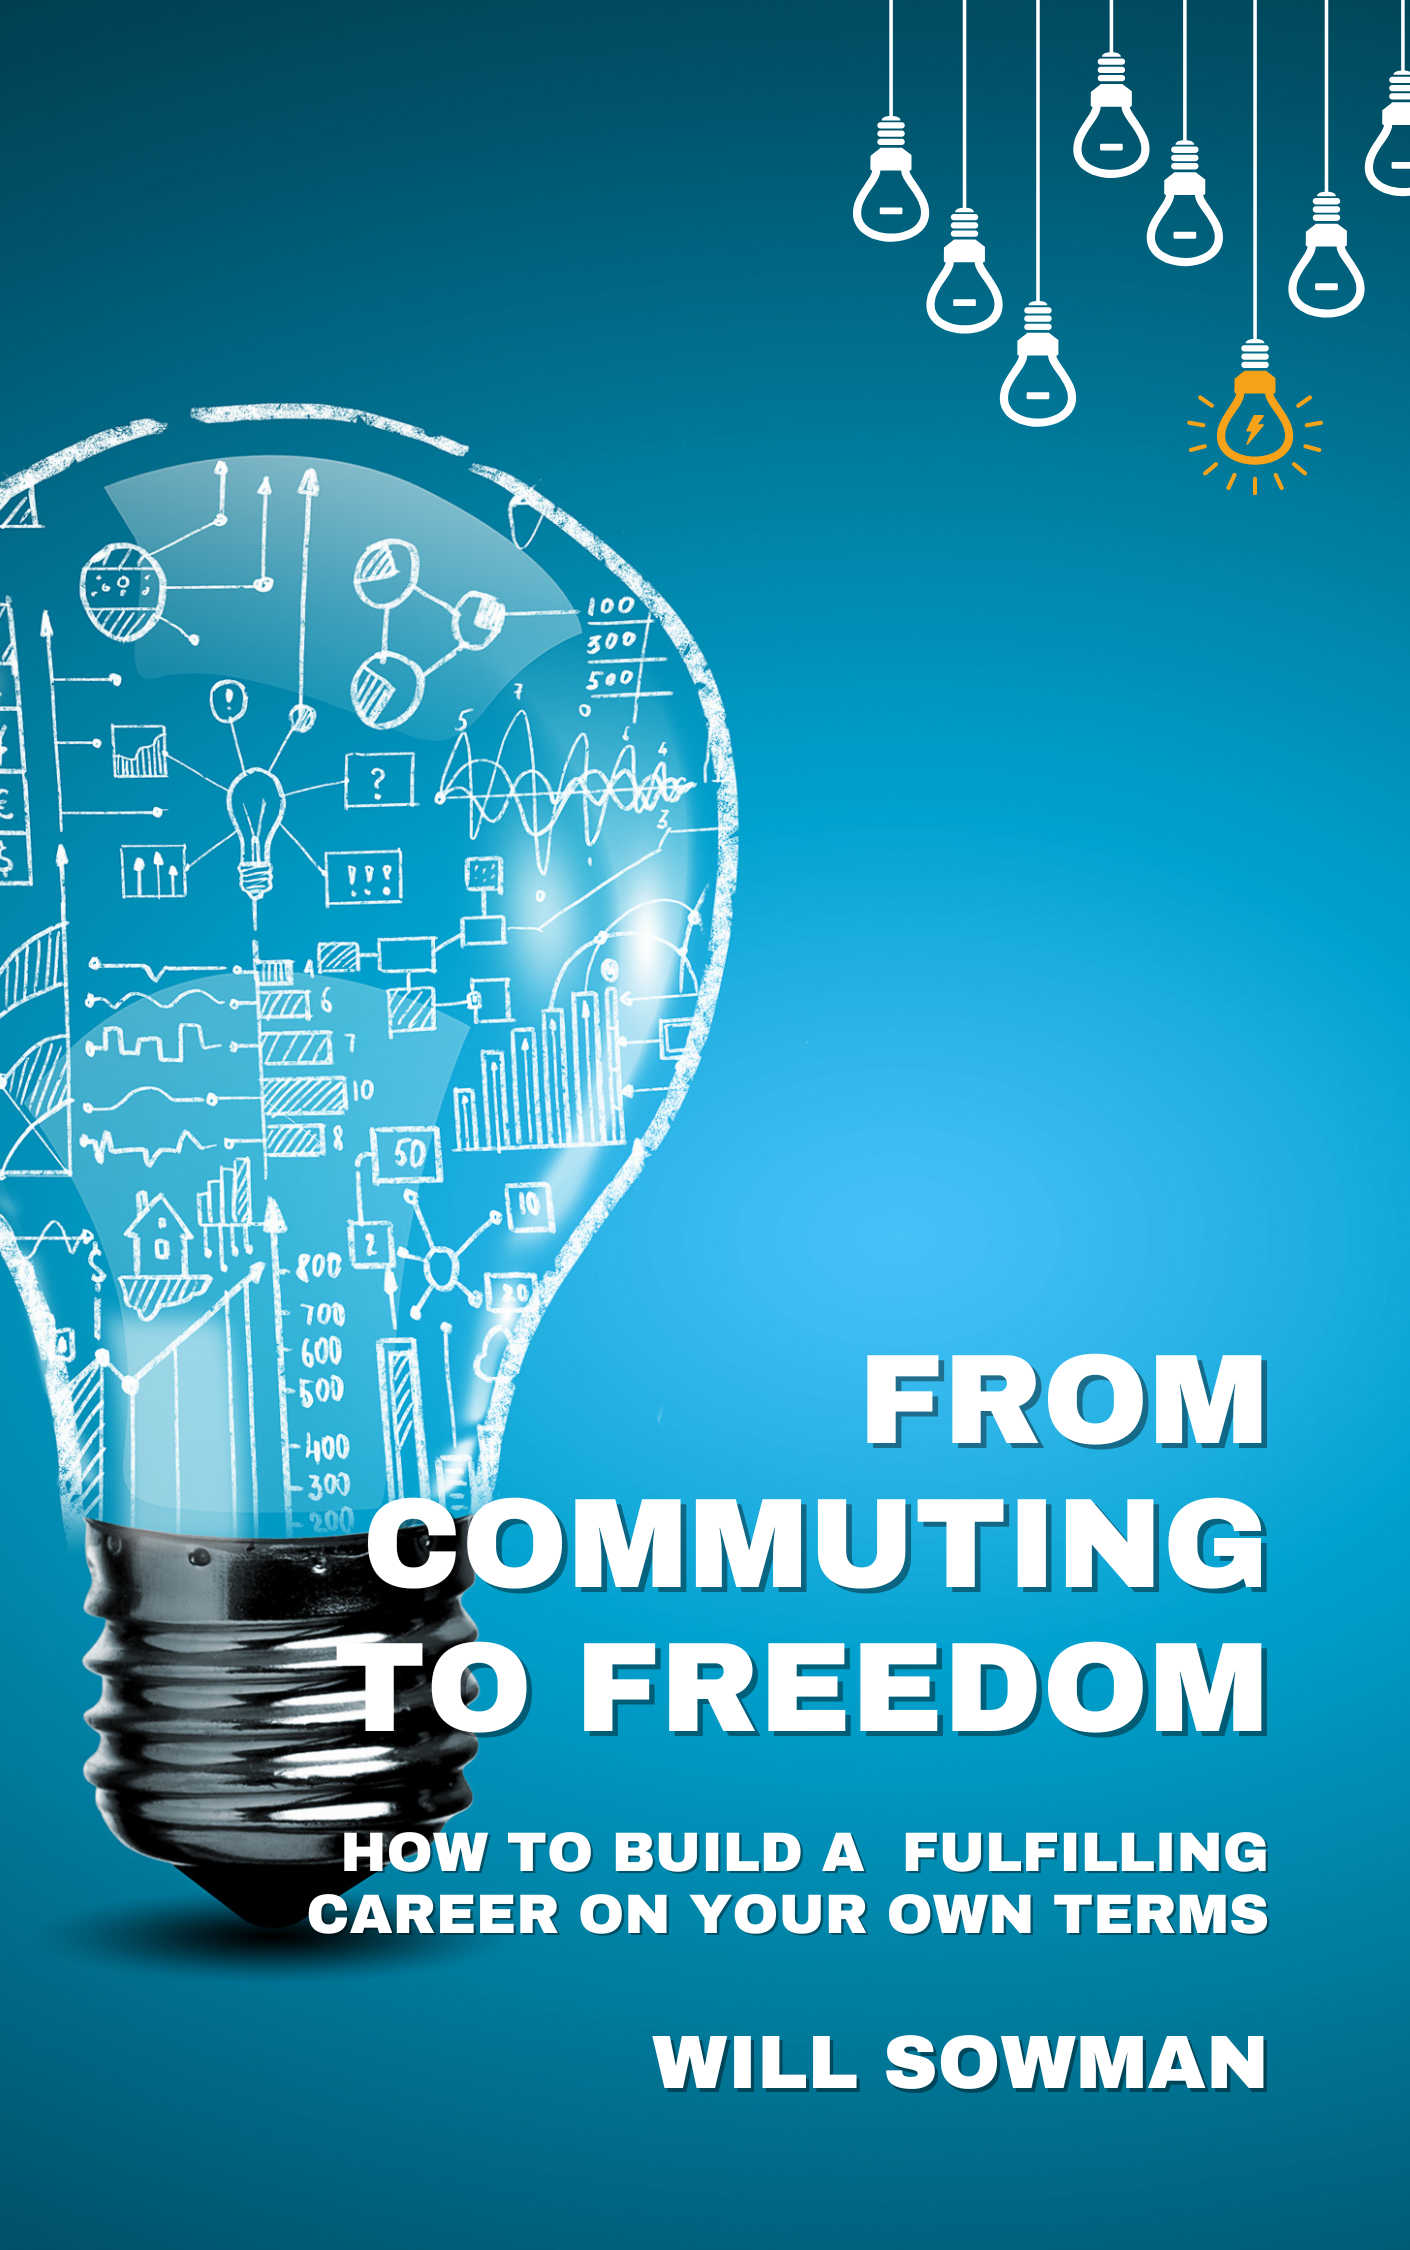 From Commuting to Freedom